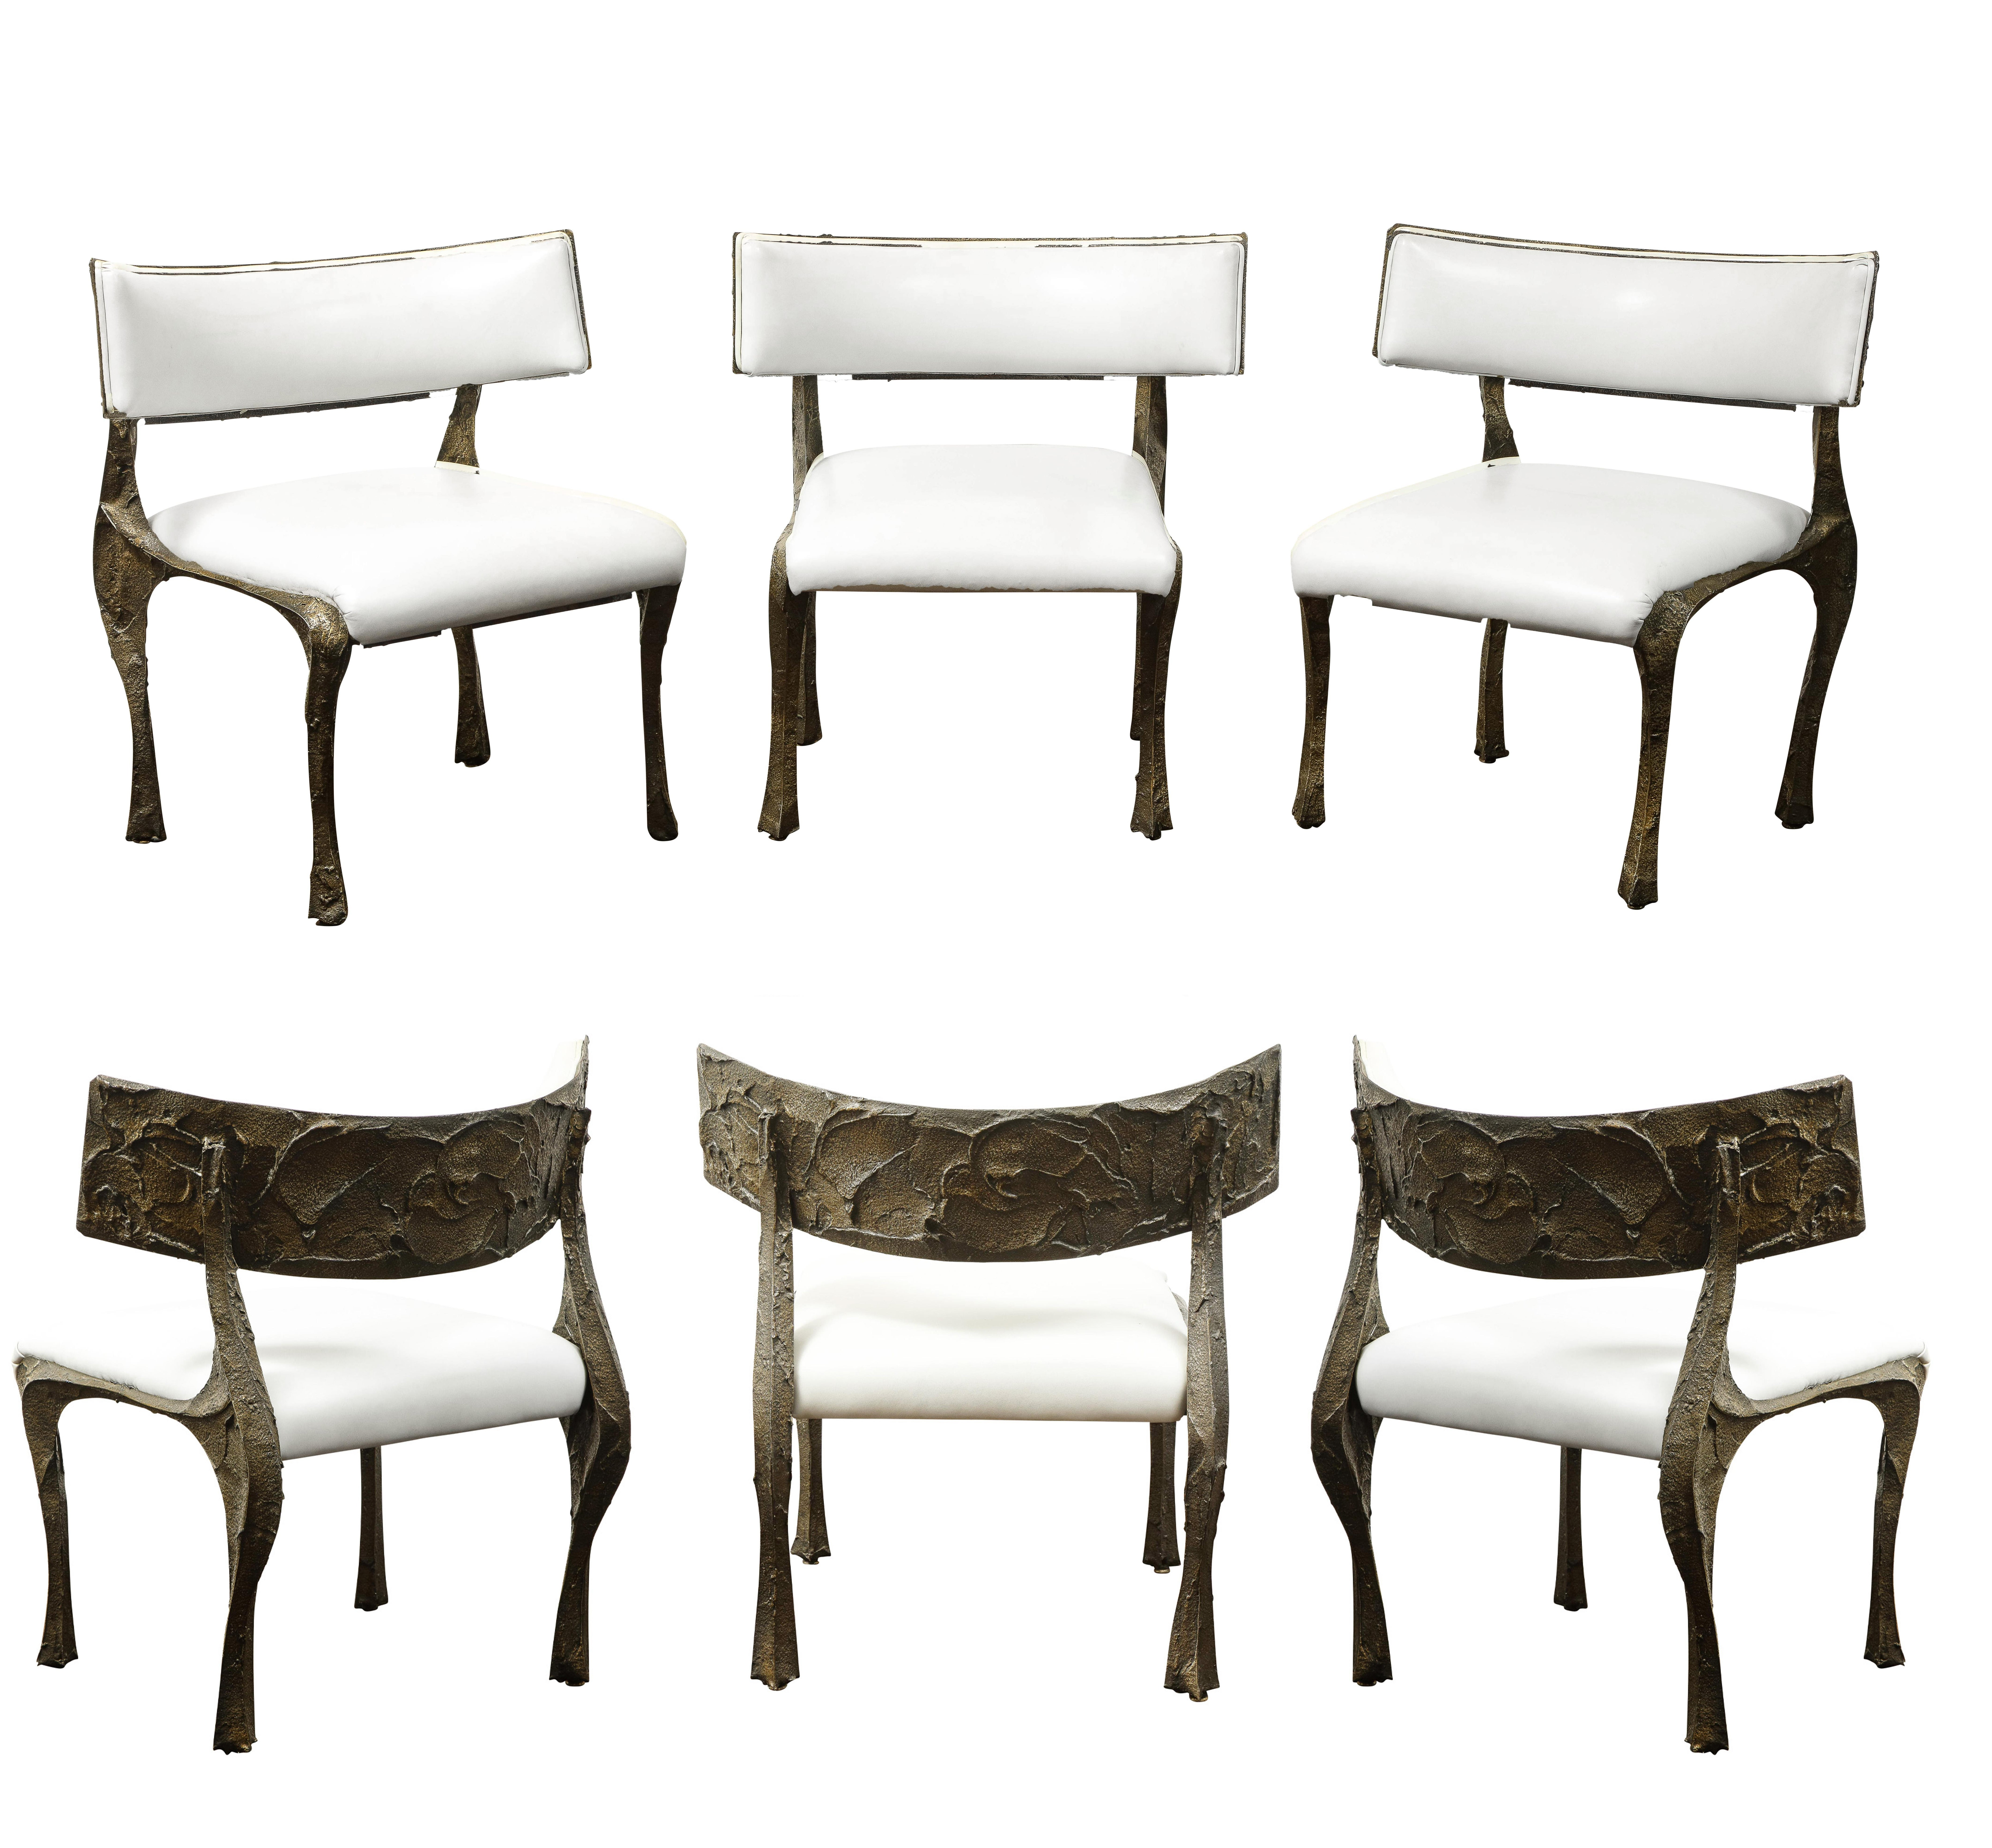 Rare and important set of 6 Sculpted Bronze Dining Chairs with seats and back upholstered in white leather by Paul Evans Studio, American 1960’s. These stunning chairs represent the epitome of Evans’ artisanship. 

Reference:

Paul Evans